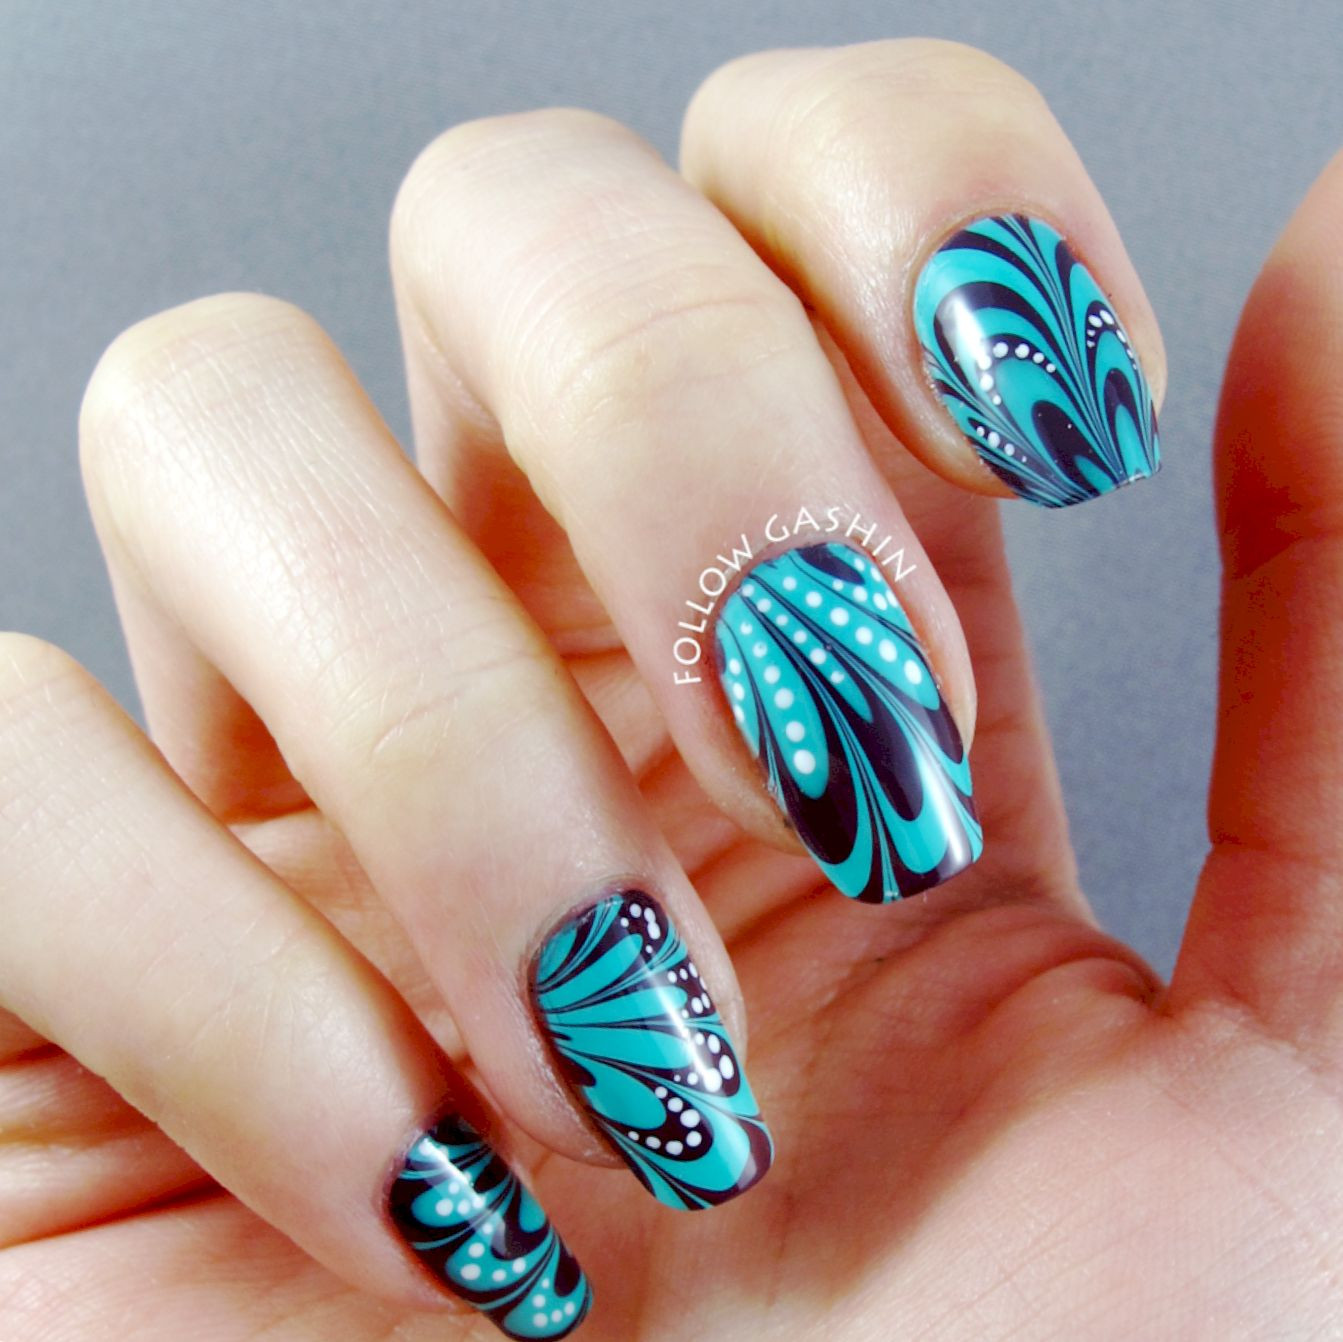 Marble Nail Art Without Water
 Marble Nail Designs Without Water Amazing Nails design